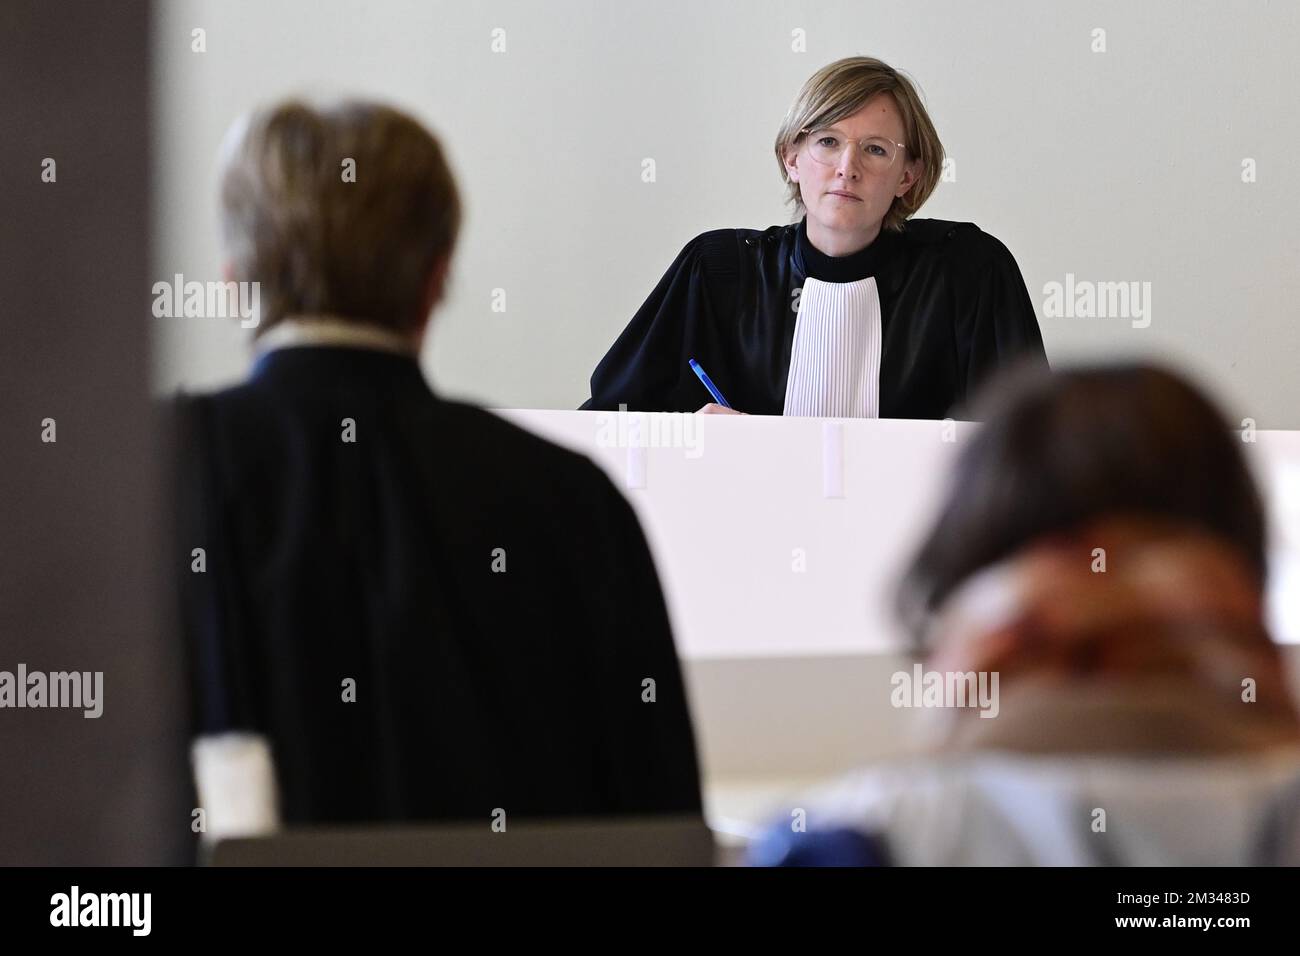 Chairwoman of the court, Marlies Vanden Avenne, pictured during the start of the retrial of the doctor who euthanized Tine Nys, Tuesday 12 January 2021, before the correctional court of Dendermonde. 38-year-old Nys was given euthanasia in 2010 to release her from psychological suffering. Her family didn't agree and took legal action. The doctor was acquitted earlier by the East-Flanders assizes court. BELGA PHOTO LAURIE DIEFFEMBACQ  Stock Photo